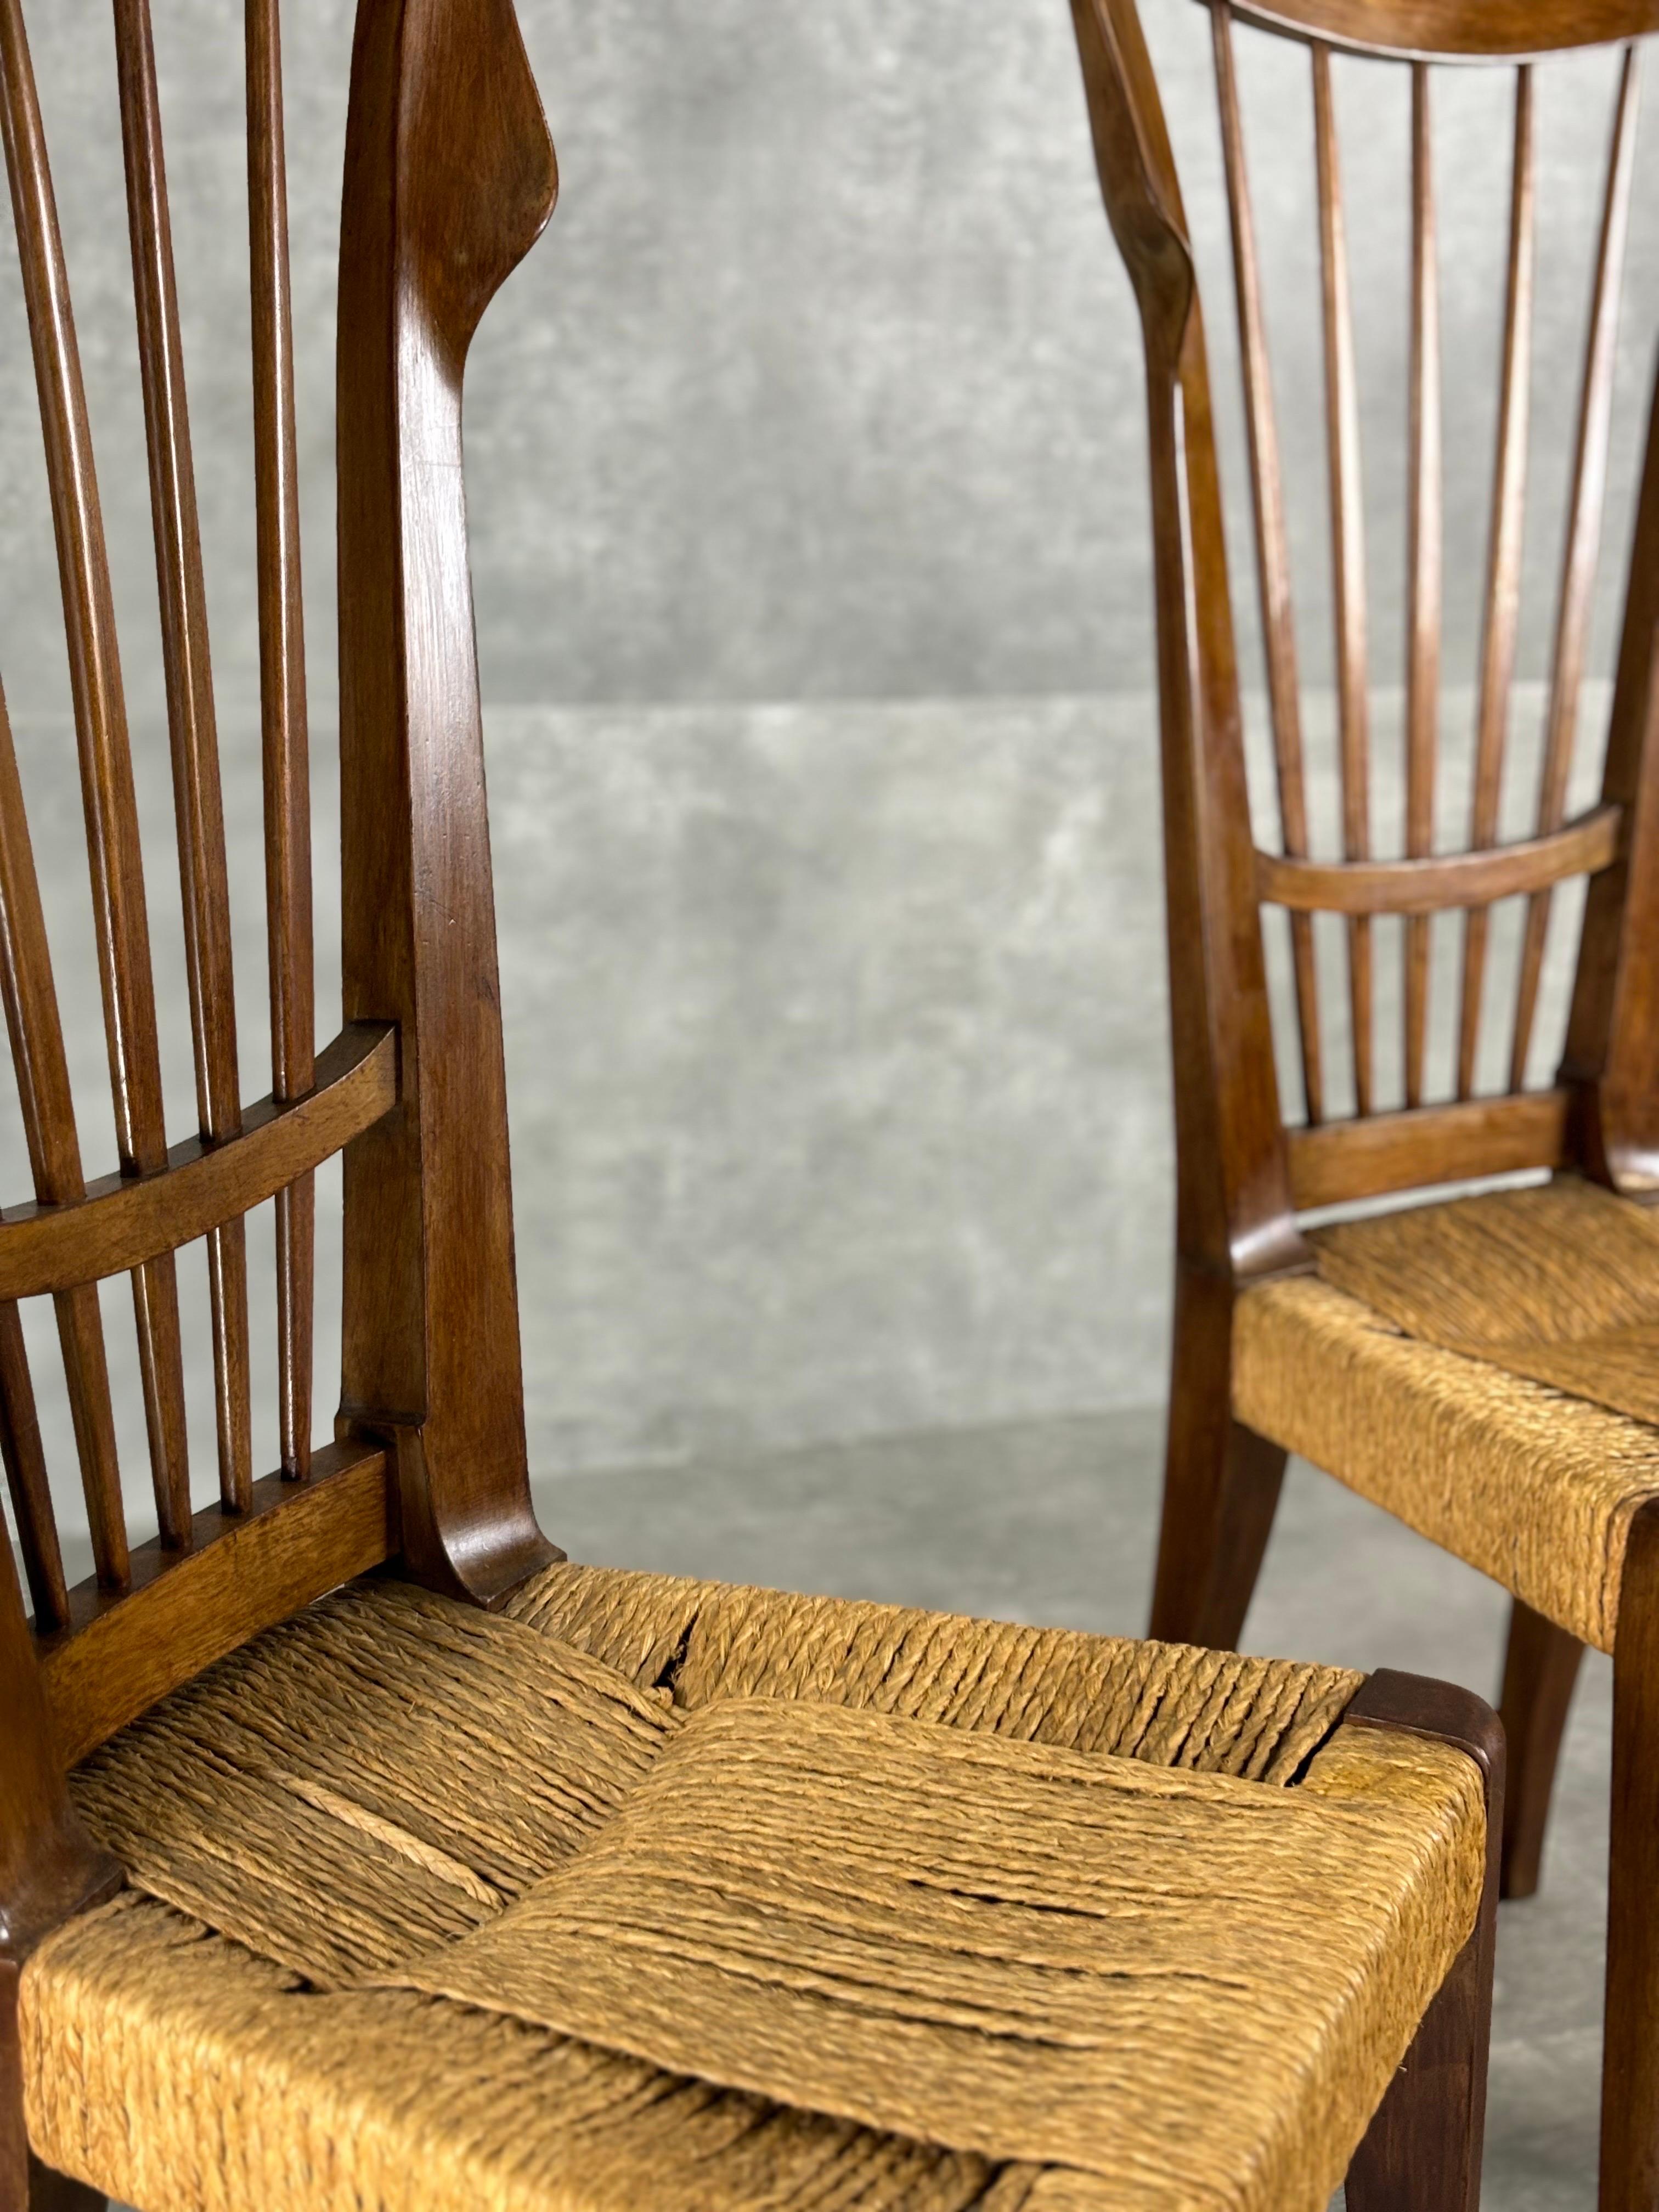 Set of two chairs designed by Guglielmo Pecorini manufactured in Italy in the 50s with wooden structure and straw seat.